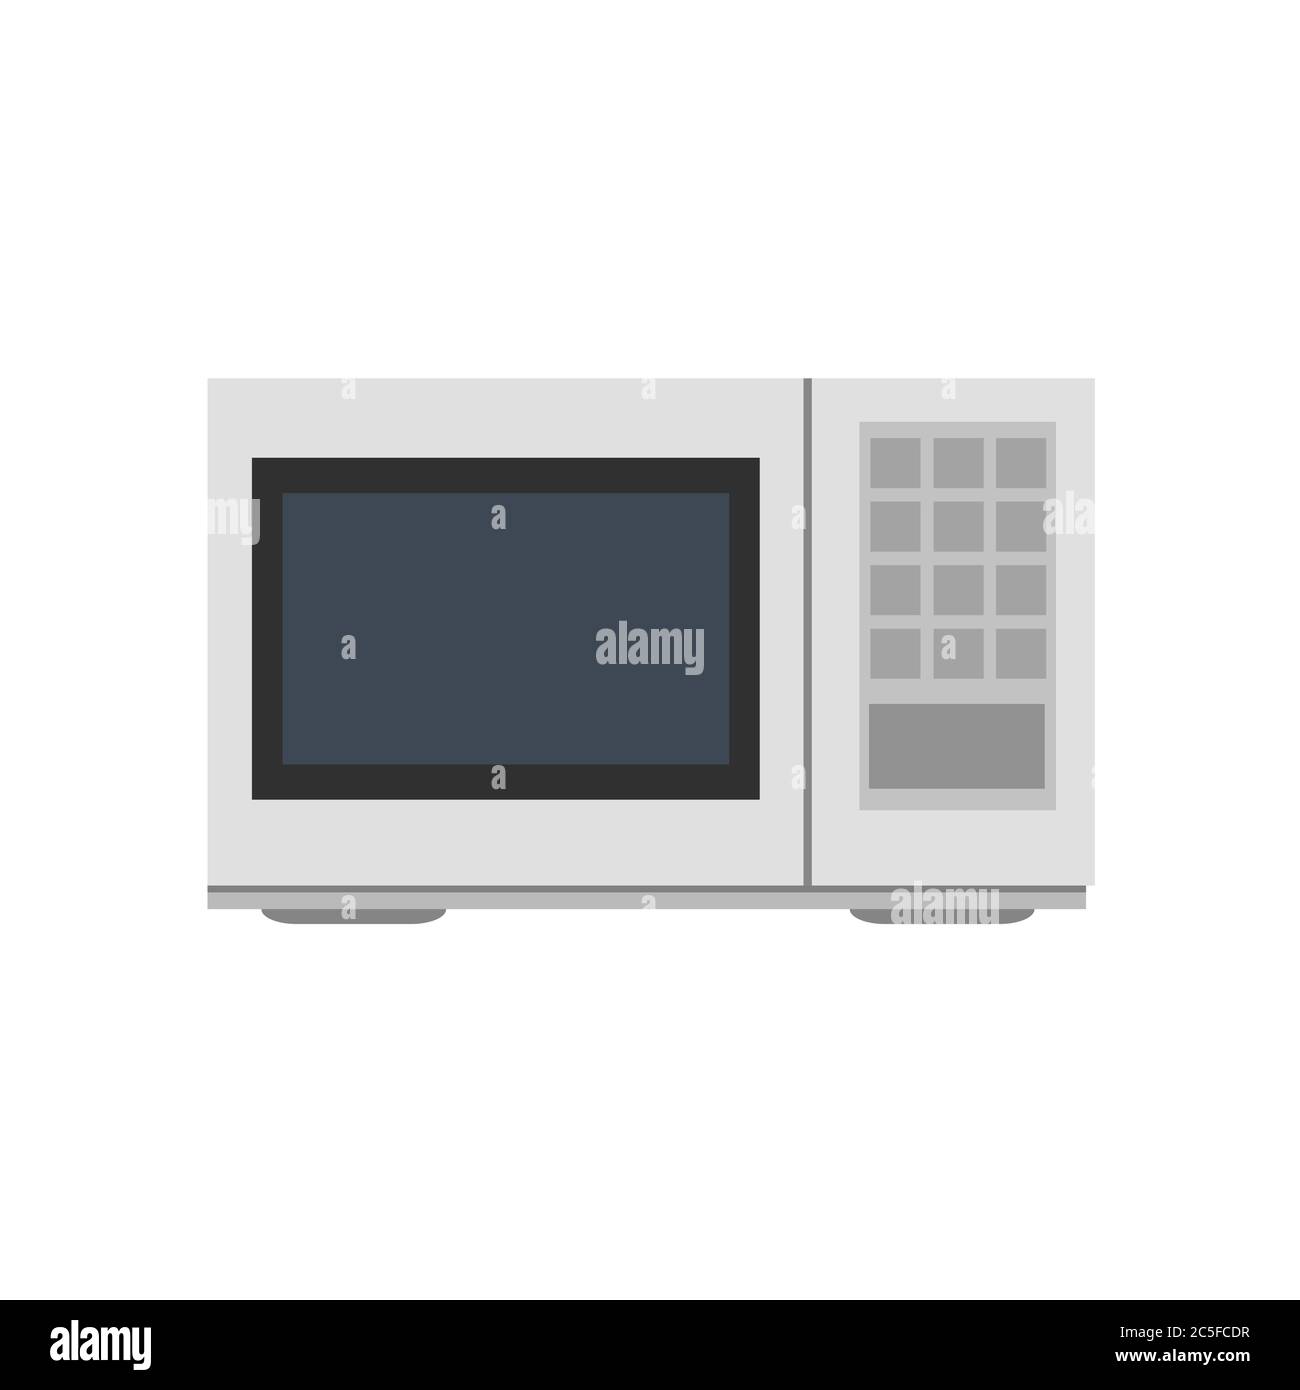 Microwave oven kitchen on white background. Kitchen appliance isolated electric element icon. Vector illustration EPS 10. Stock Vector